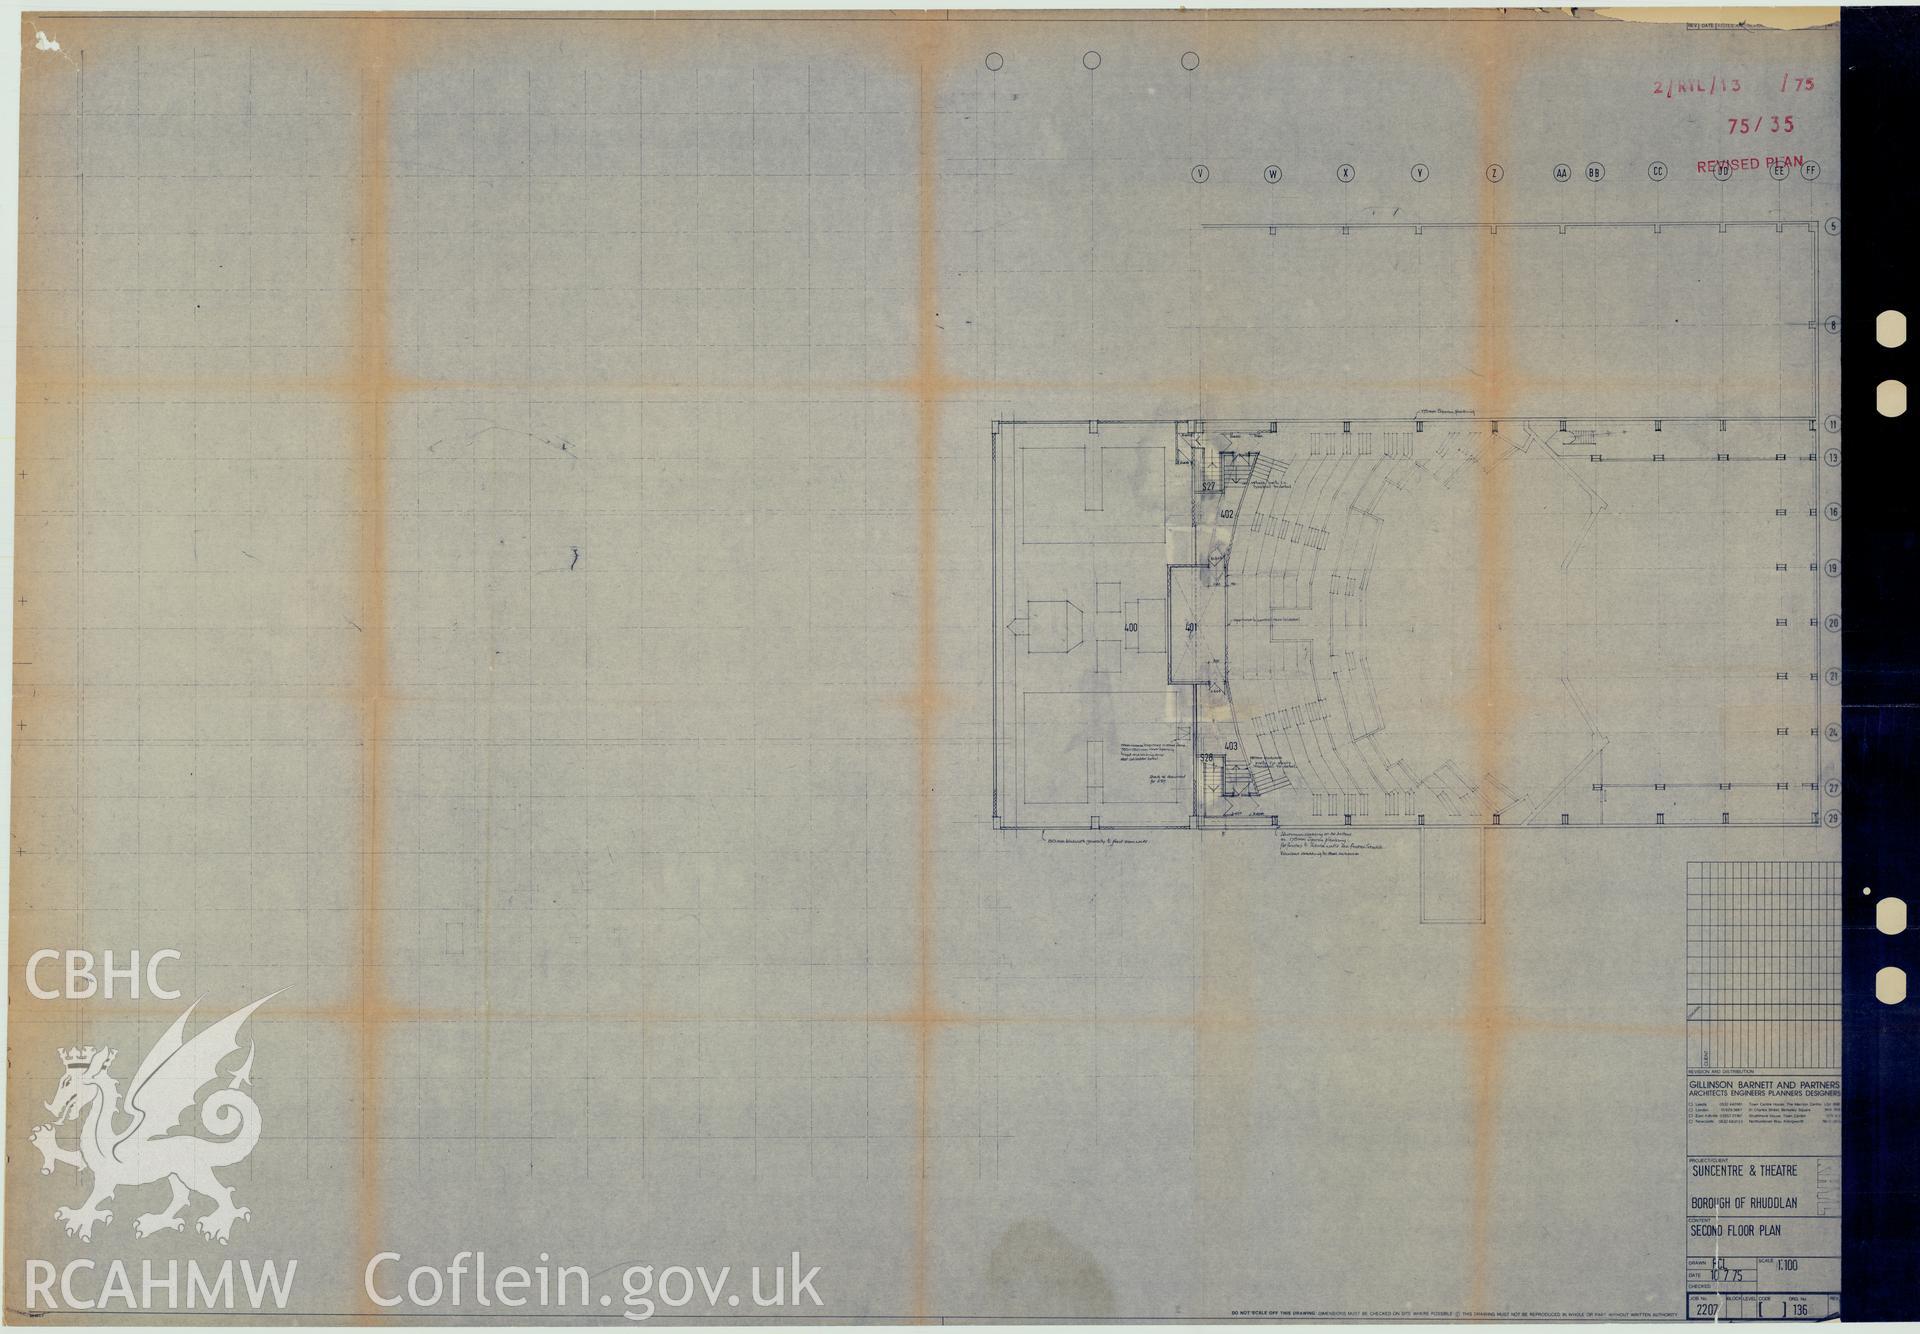 Digital copy of a measured drawing showing second floor plan of the Sun Centre, Rhyl, produced by Gillinson Barnett and Partners. Loaned for copying by Denbighshire County Council.